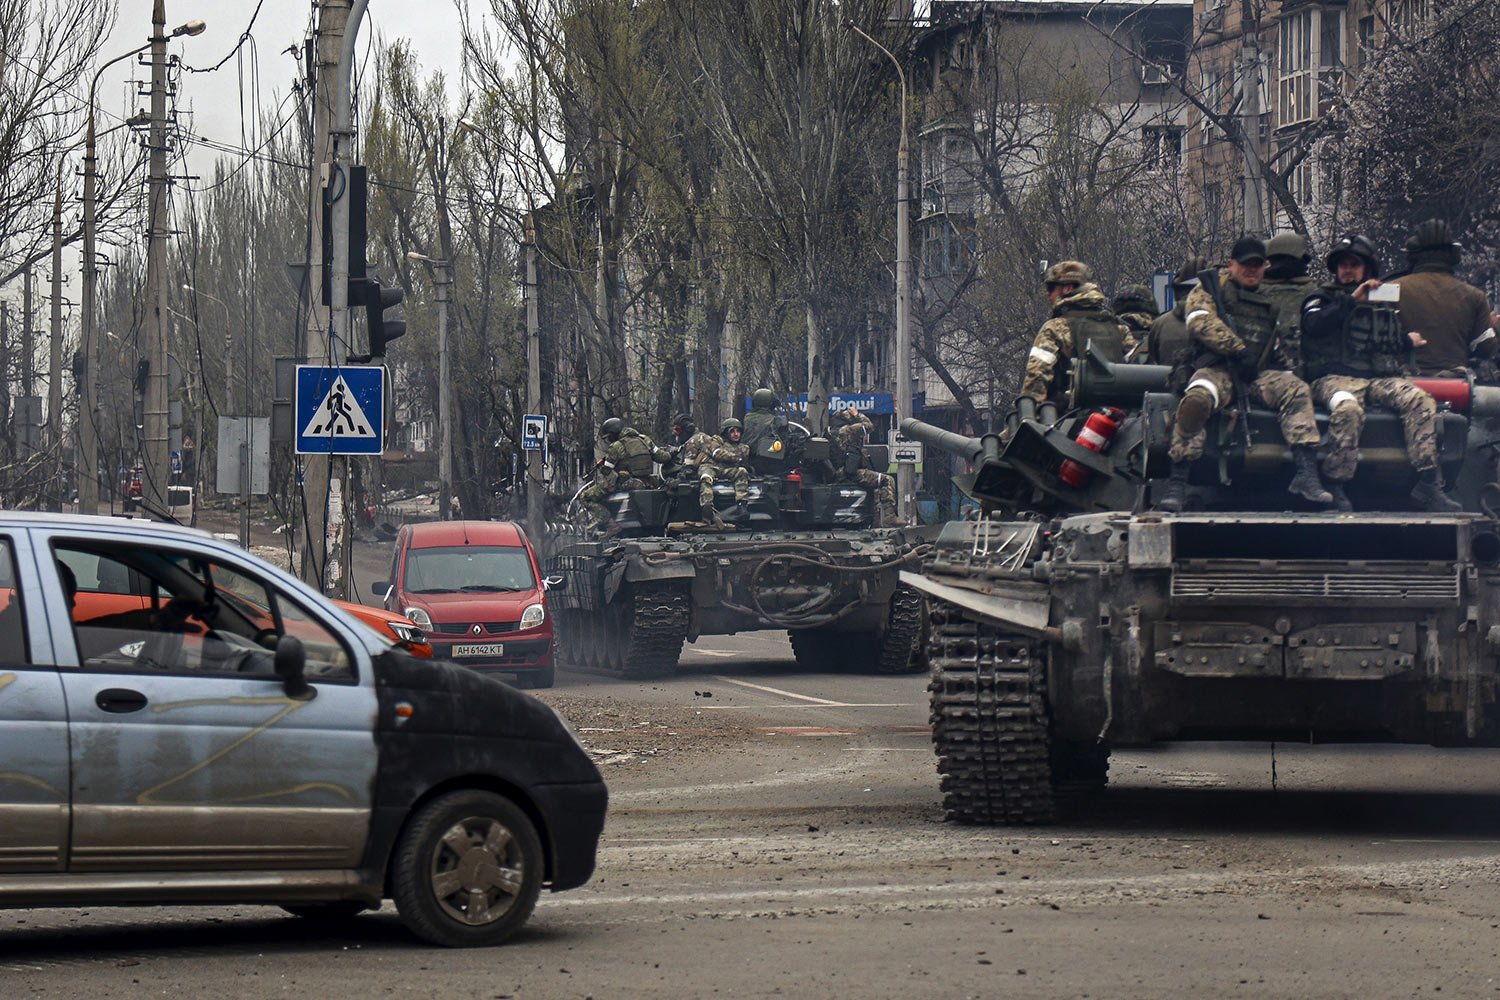  Russian tanks roll along a street in an area controlled by Russian-backed separatist forces in Mariupol, Ukraine, Saturday, April 23, 2022. (AP Photo/Alexei Alexandrov) 